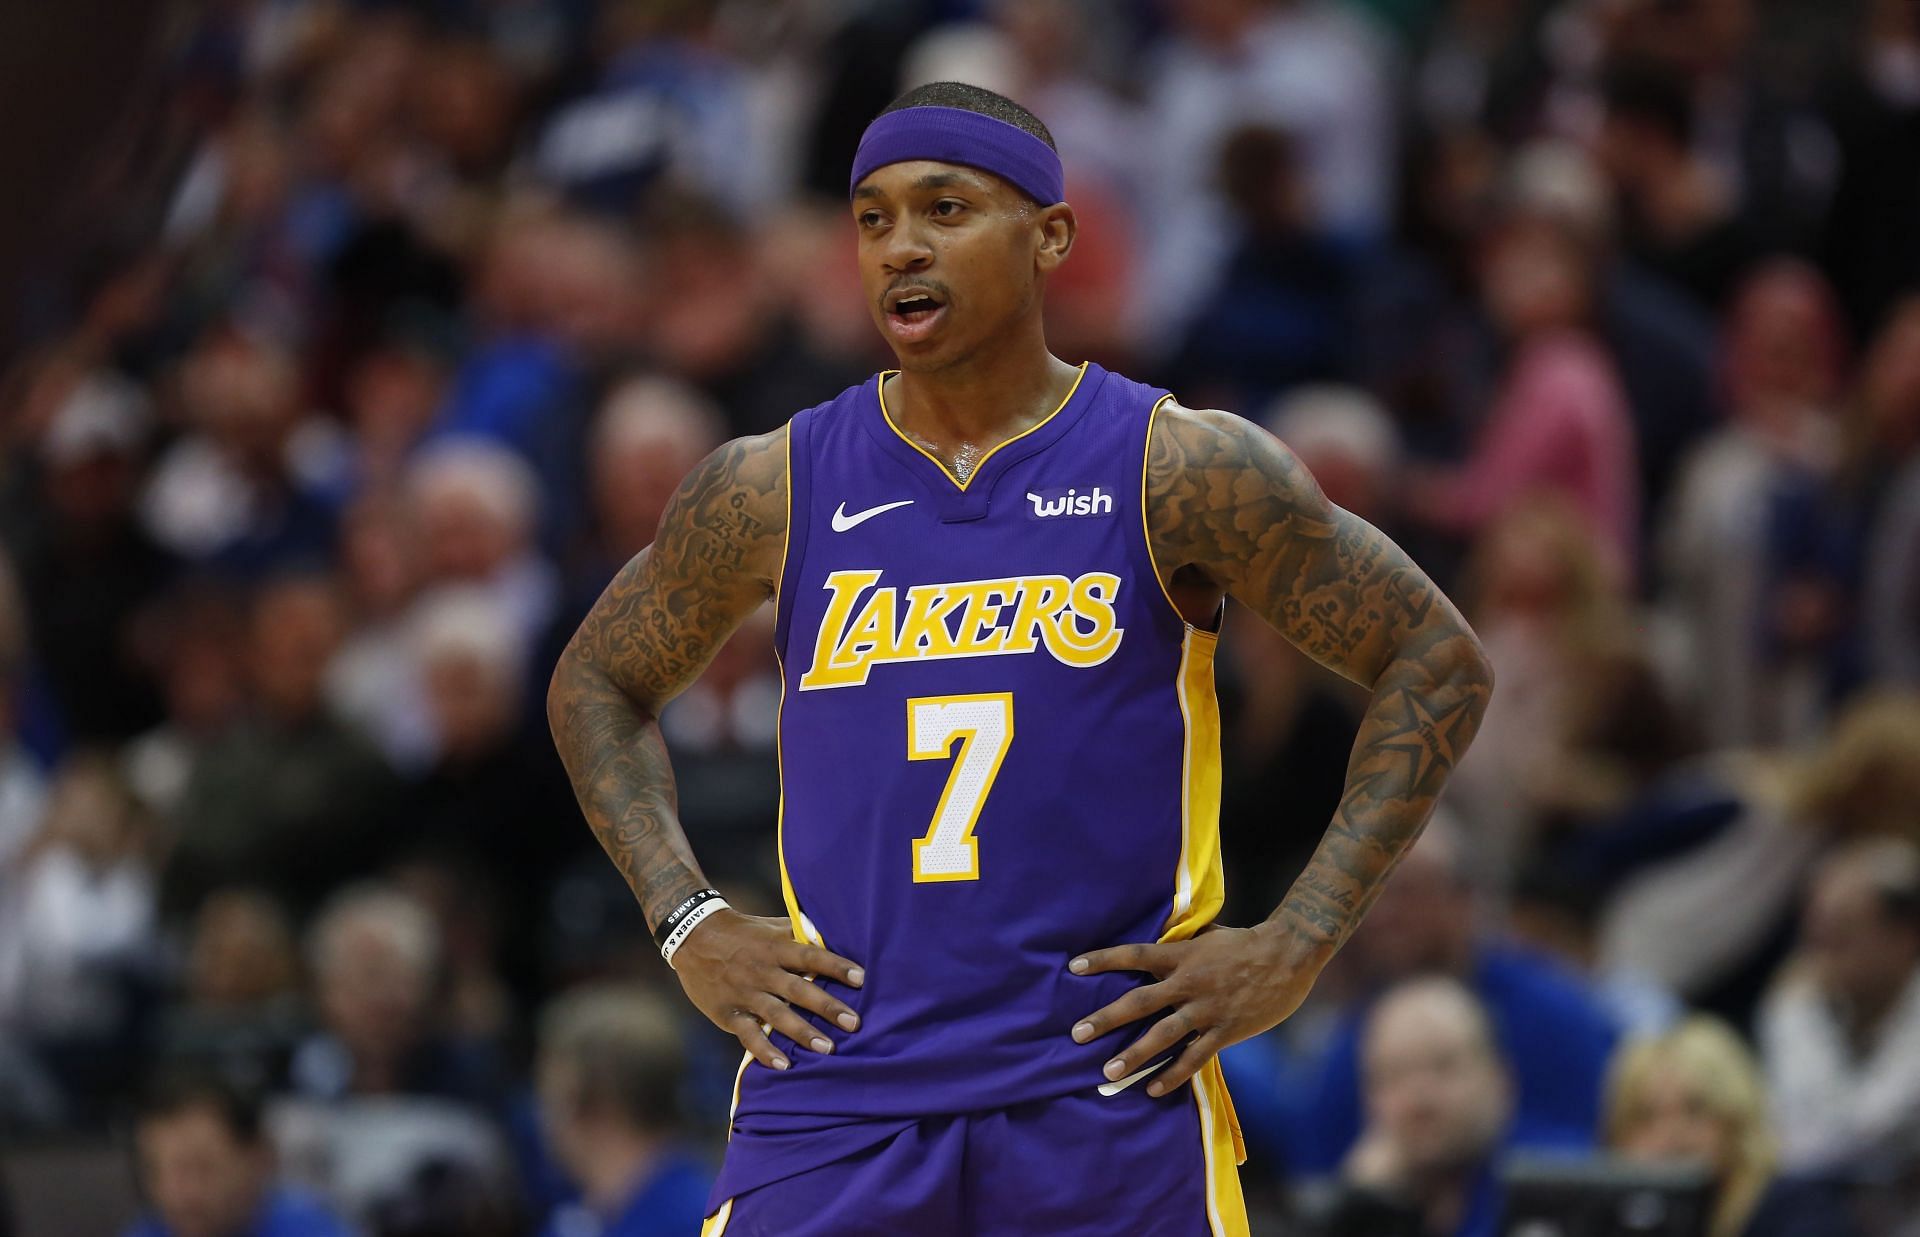 Isaiah Thomas has signed with the Los Angeles Lakers